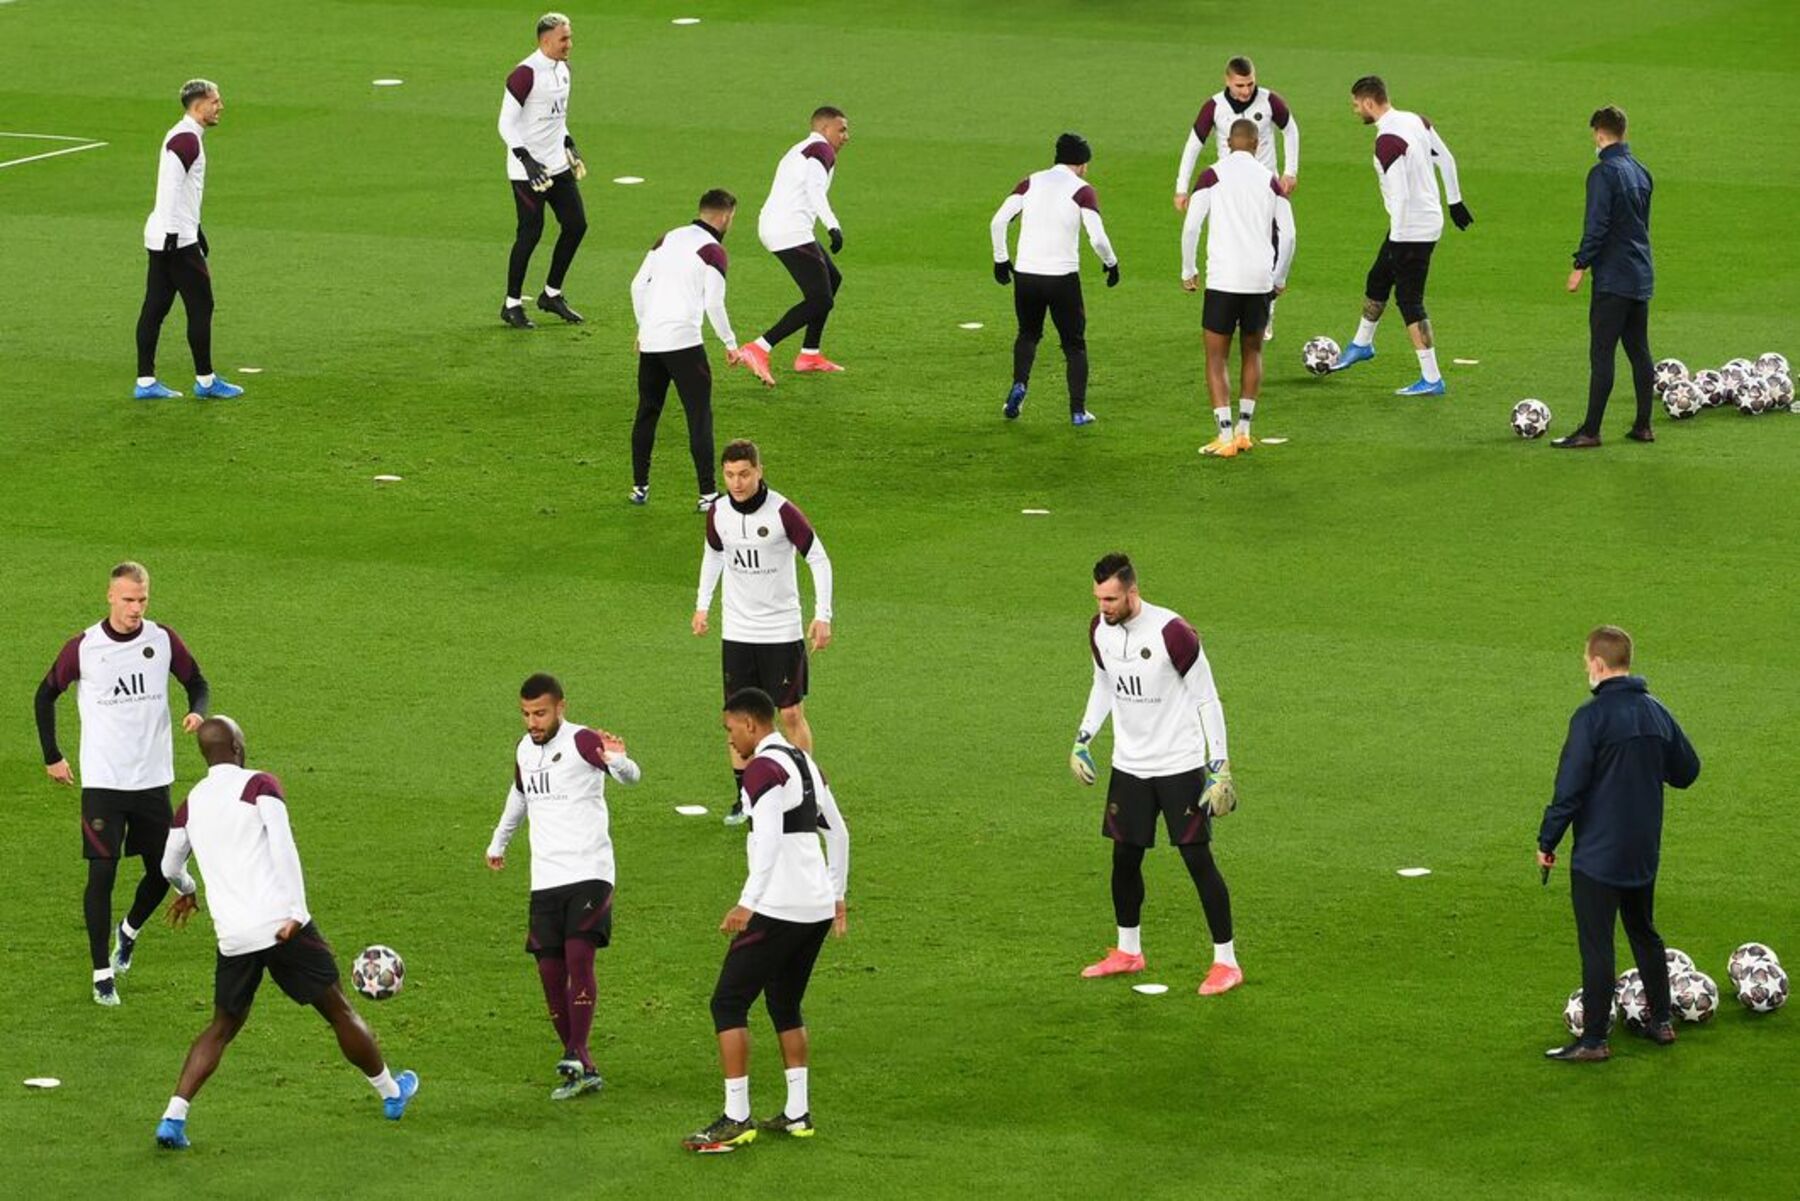 Keuze Verkeersopstopping pad Video: PSG Takes Part in a Training Session at the Camp Nou Ahead of  Champions League Showdown Against Barcelona - PSG Talk